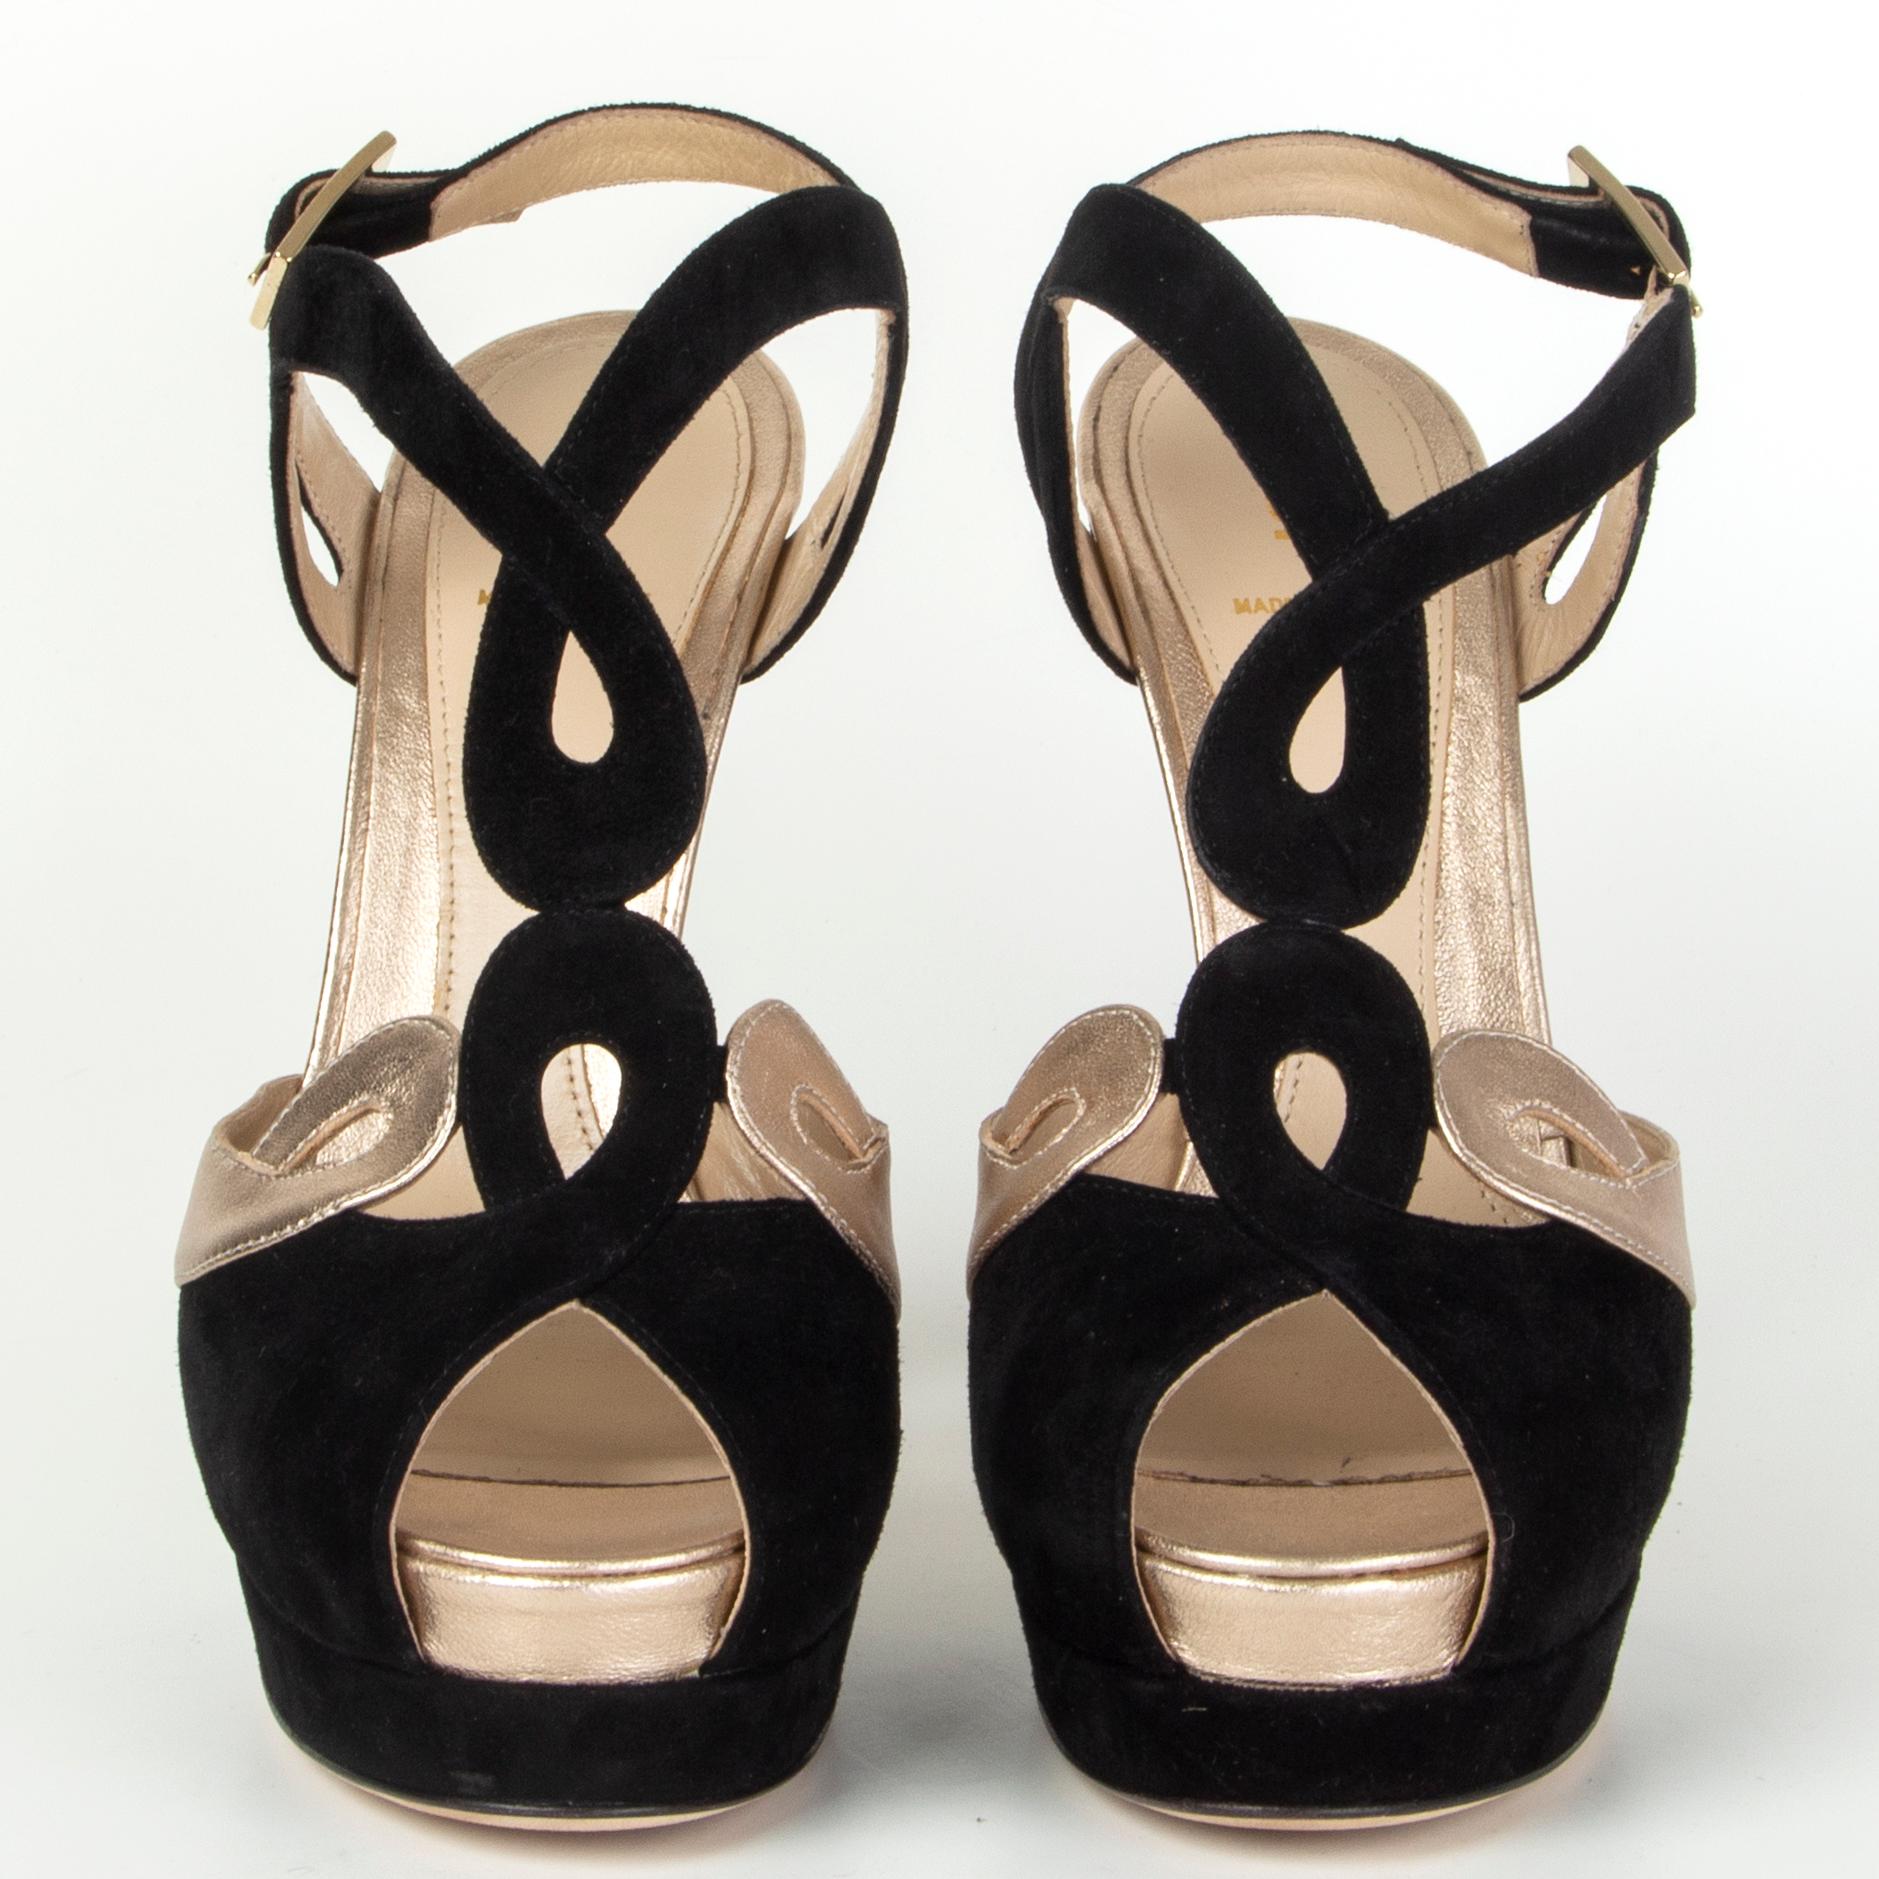 100% authentic Fendi platform sandals in black suede and metallic light-gold calfskin. Have been worn once and are in excellent condition. 

Measurements
Imprinted Size	39
Shoe Size	39
Inside Sole	25cm (9.8in)
Width	7.5cm (2.9in)
Heel	14cm